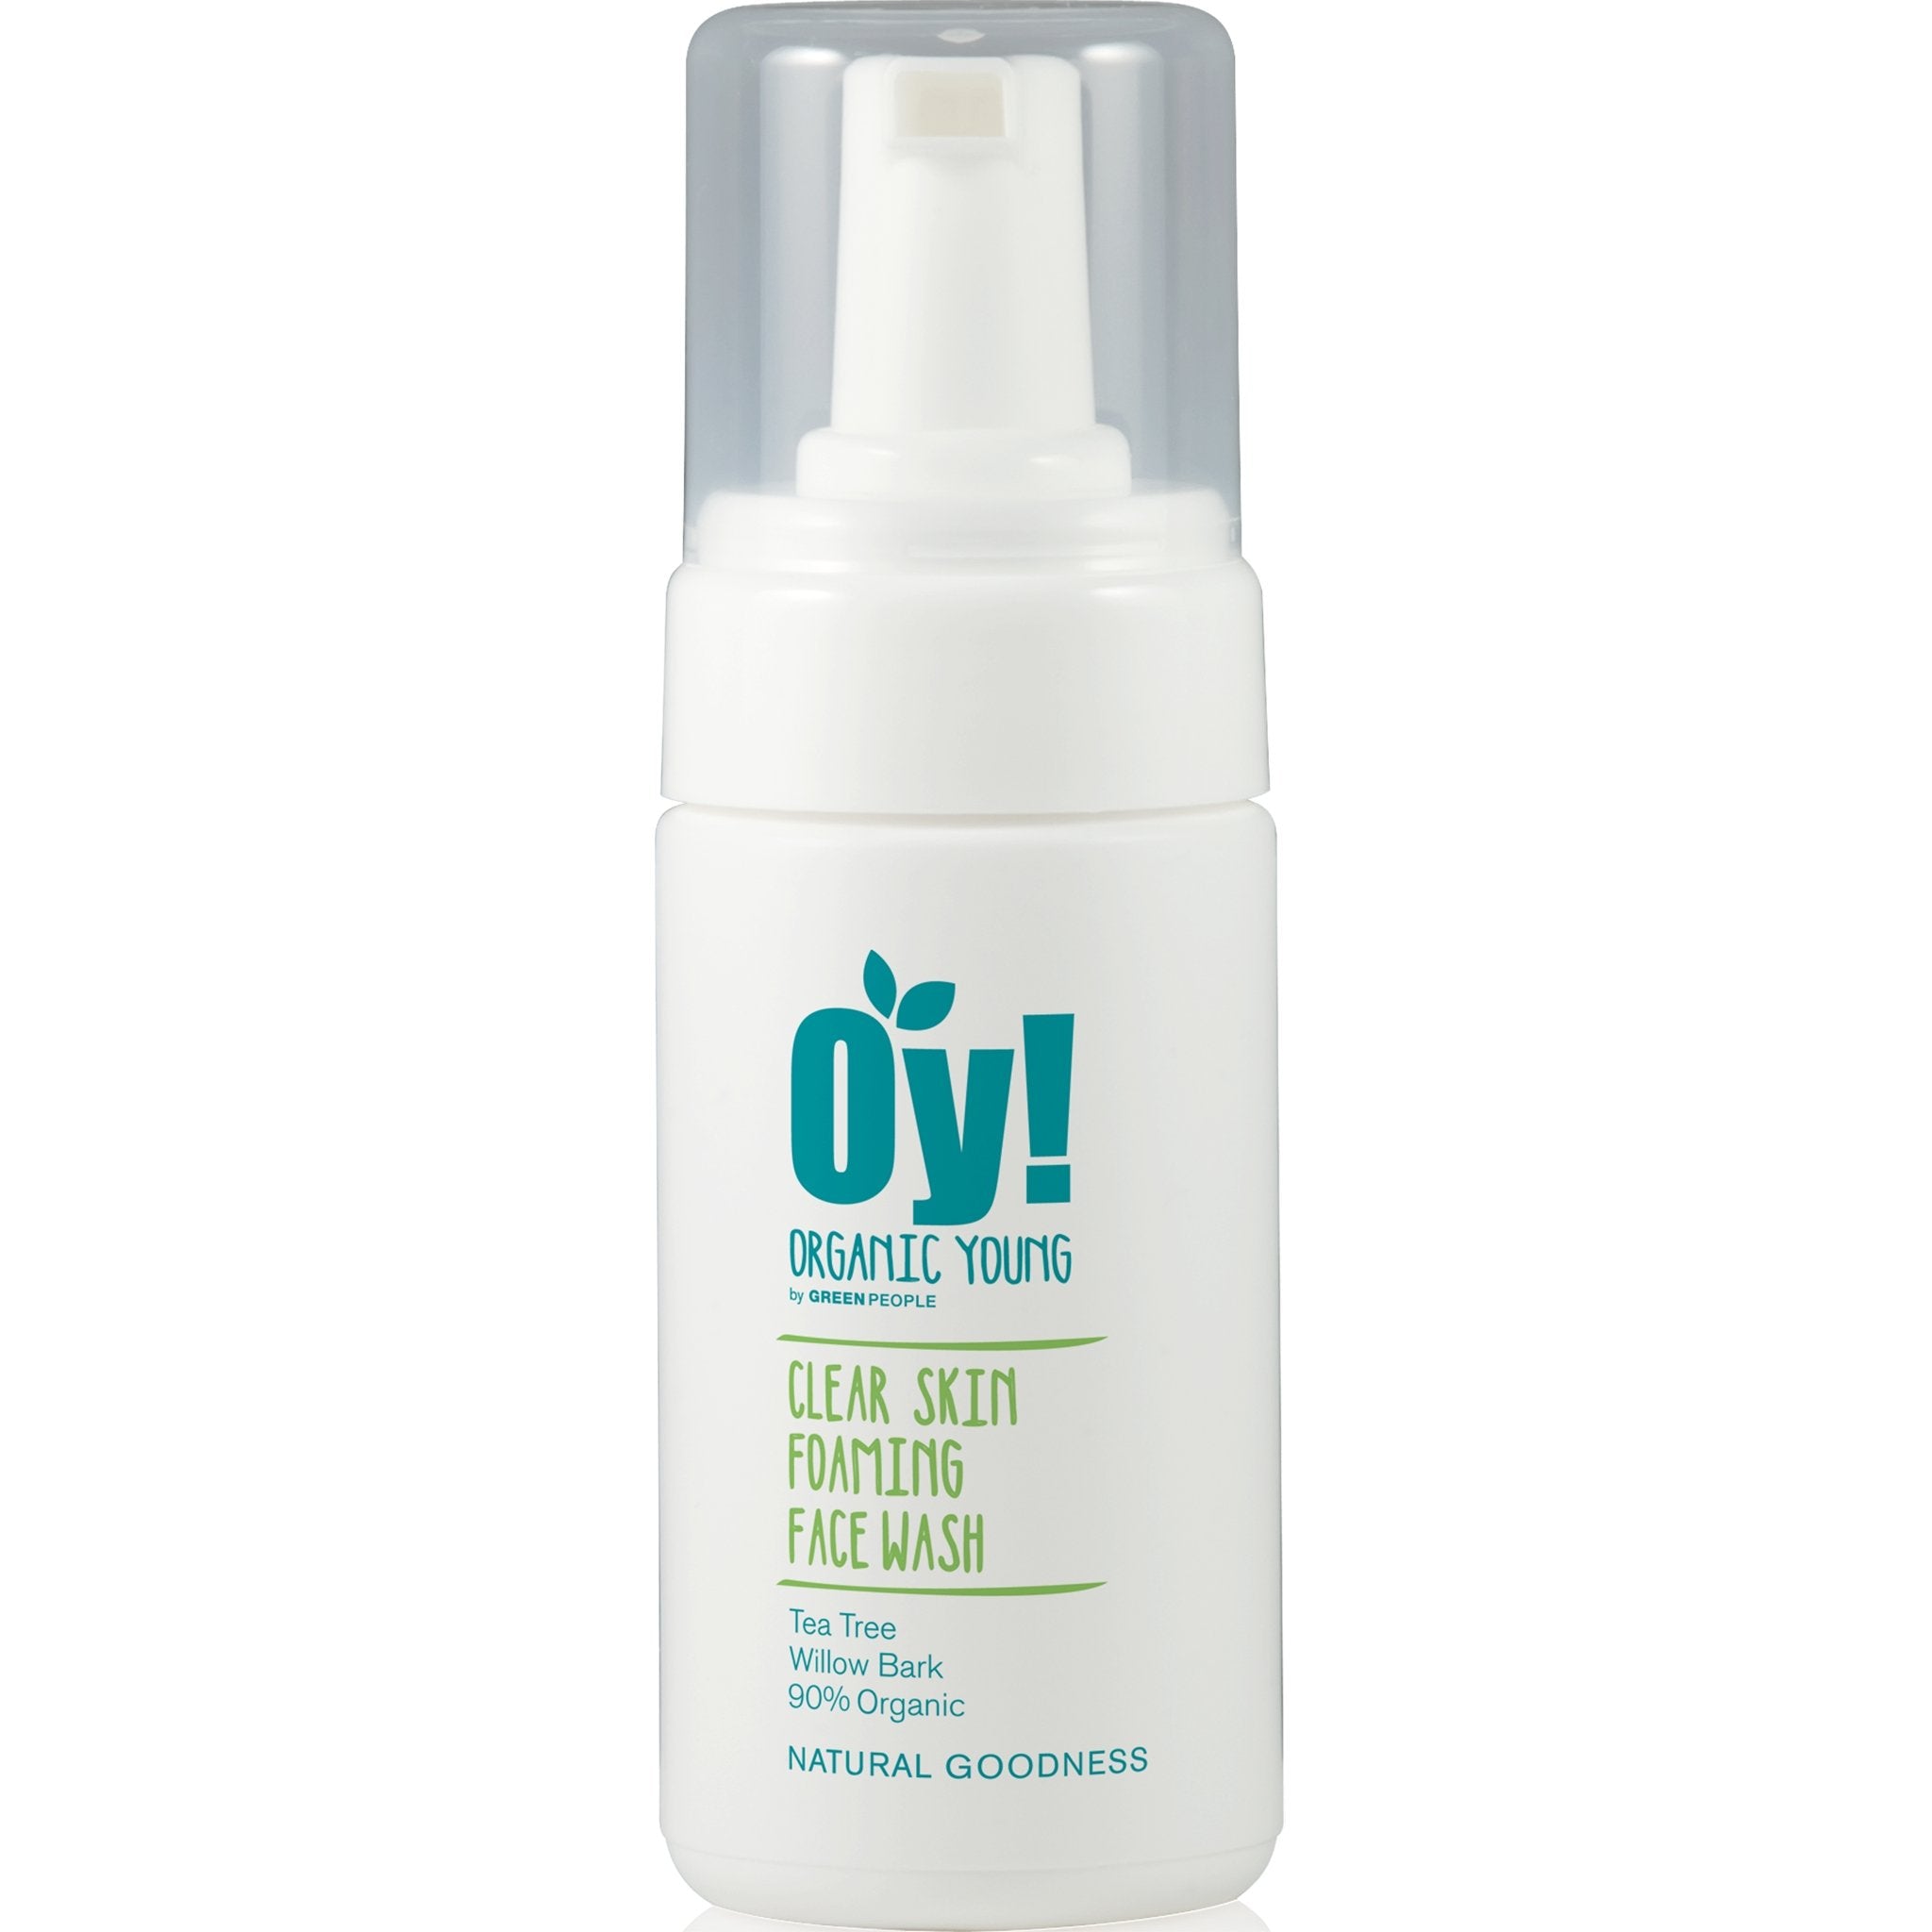 Oy! Clear Skin Foaming Face Wash - mypure.co.uk